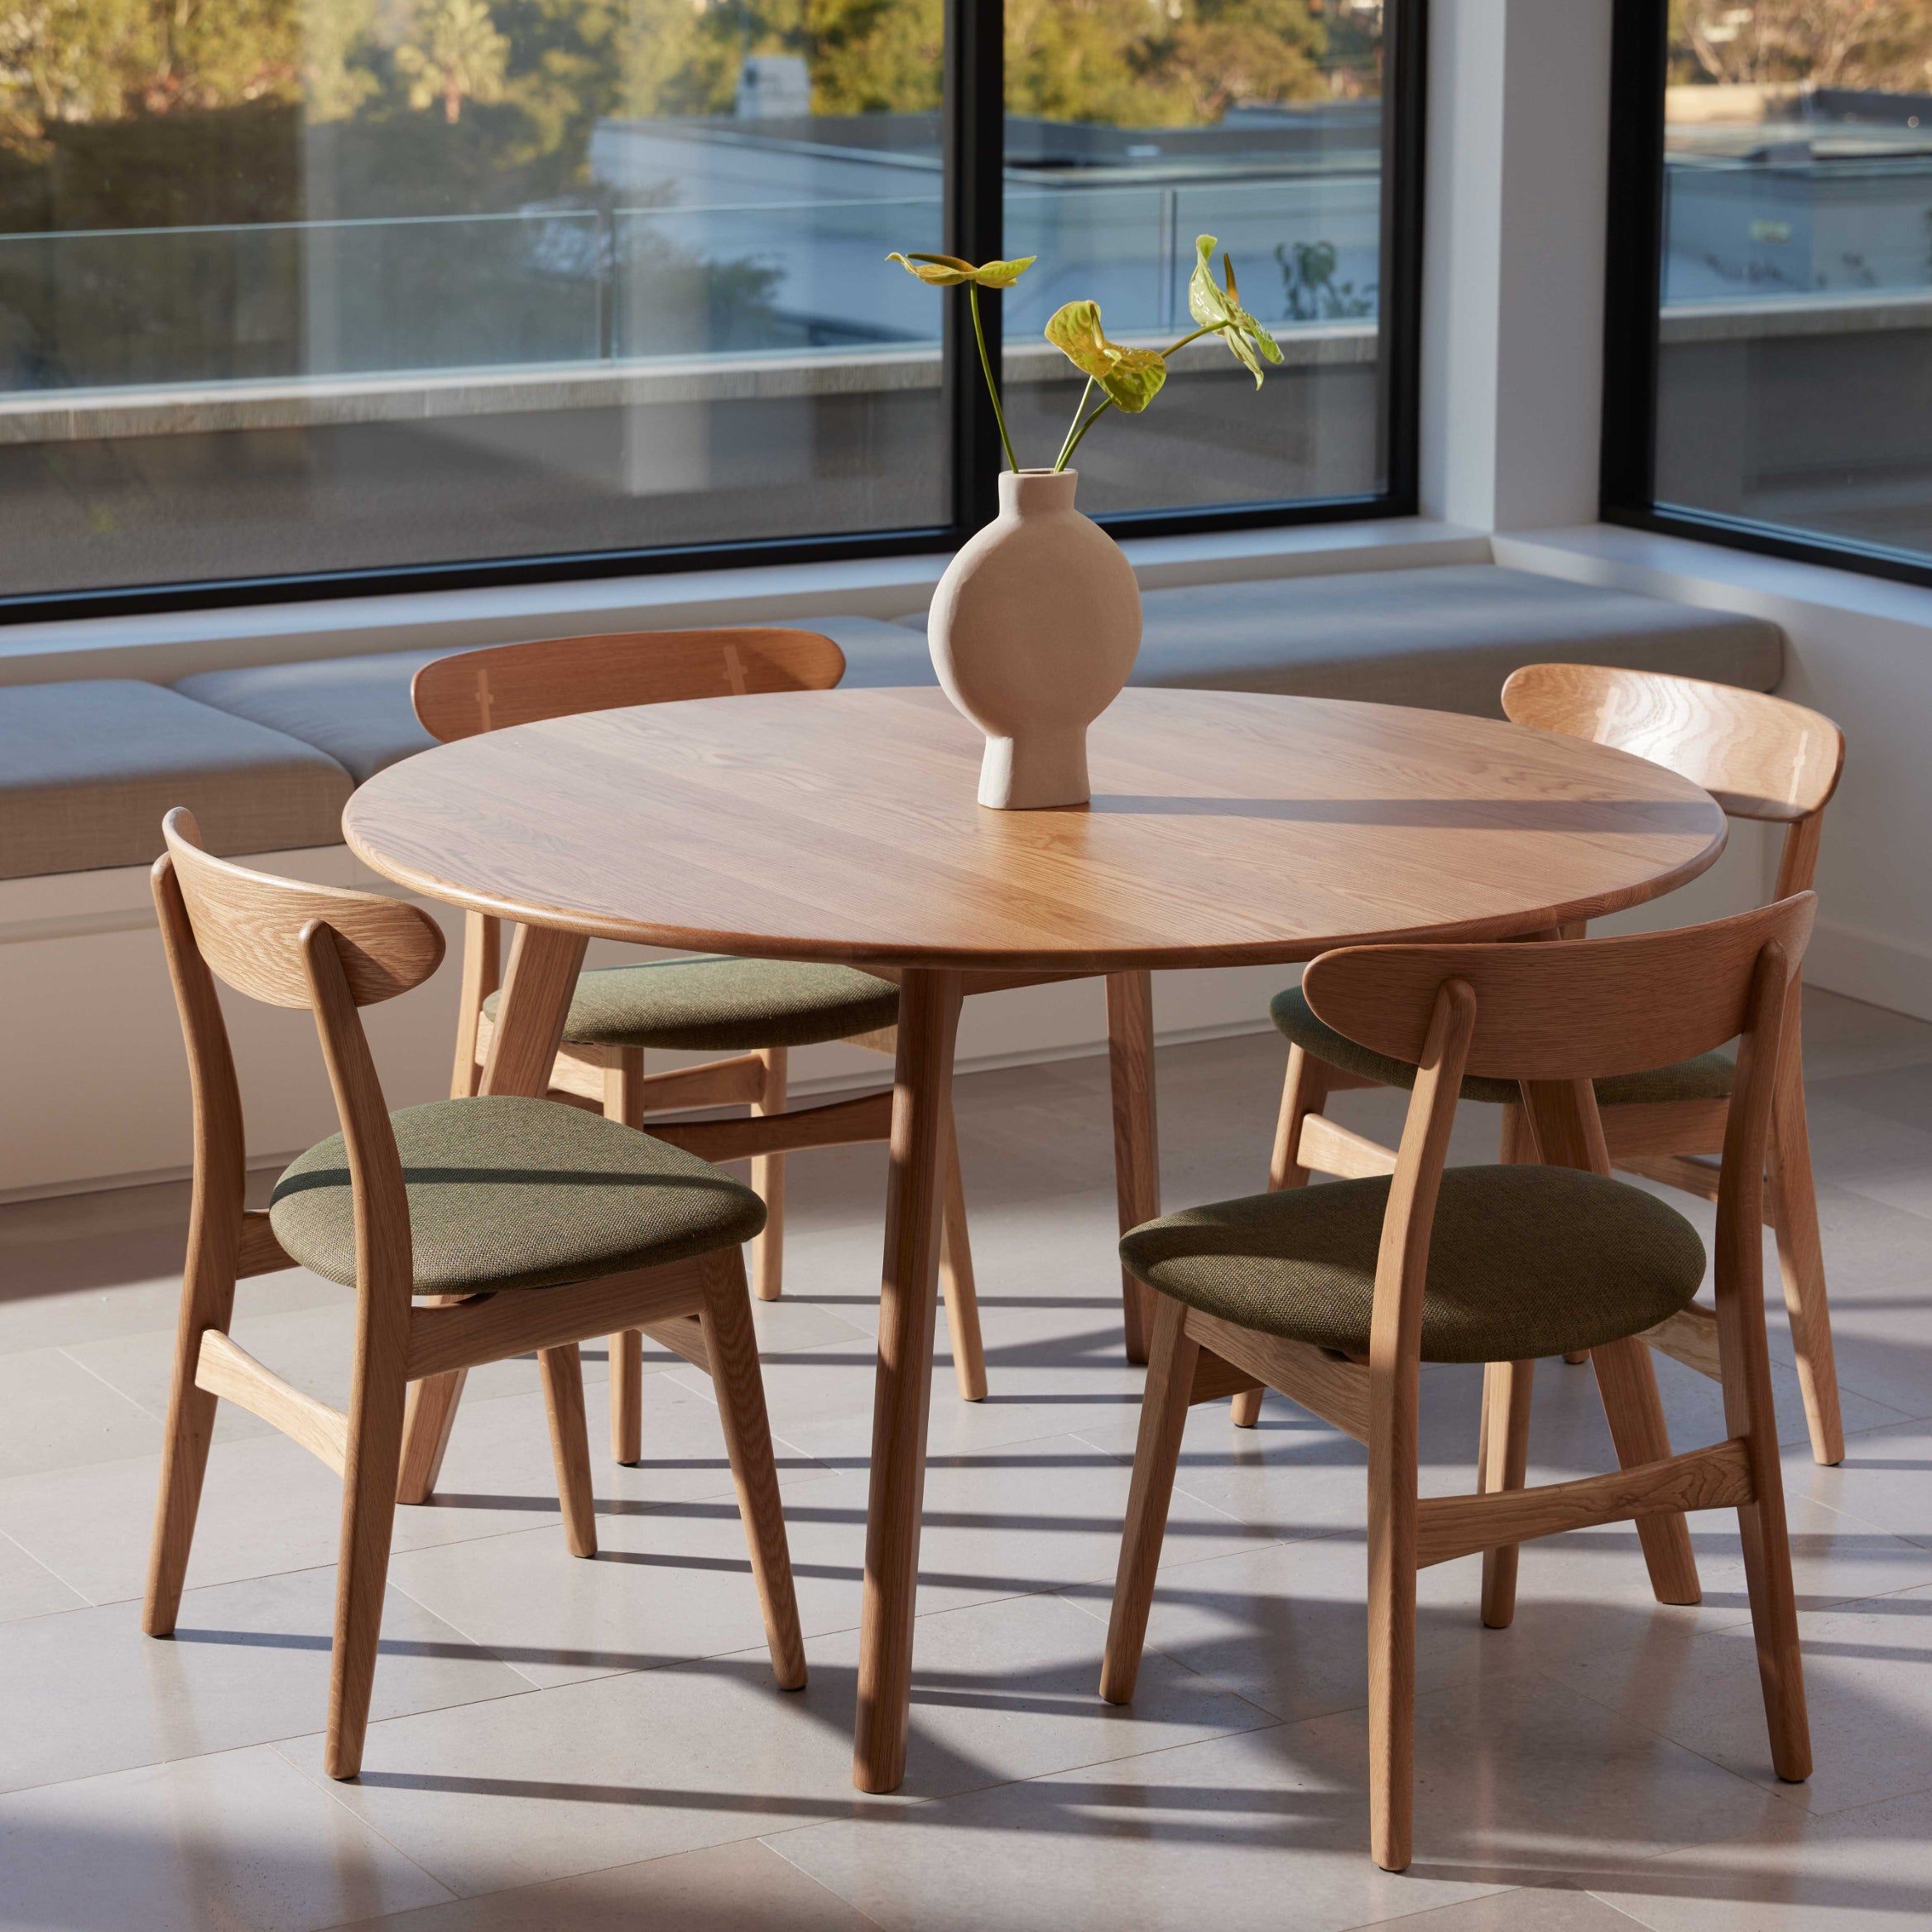 Rustic Charm: Round Wood Kitchen Table Sets for a Timeless Dining Experience